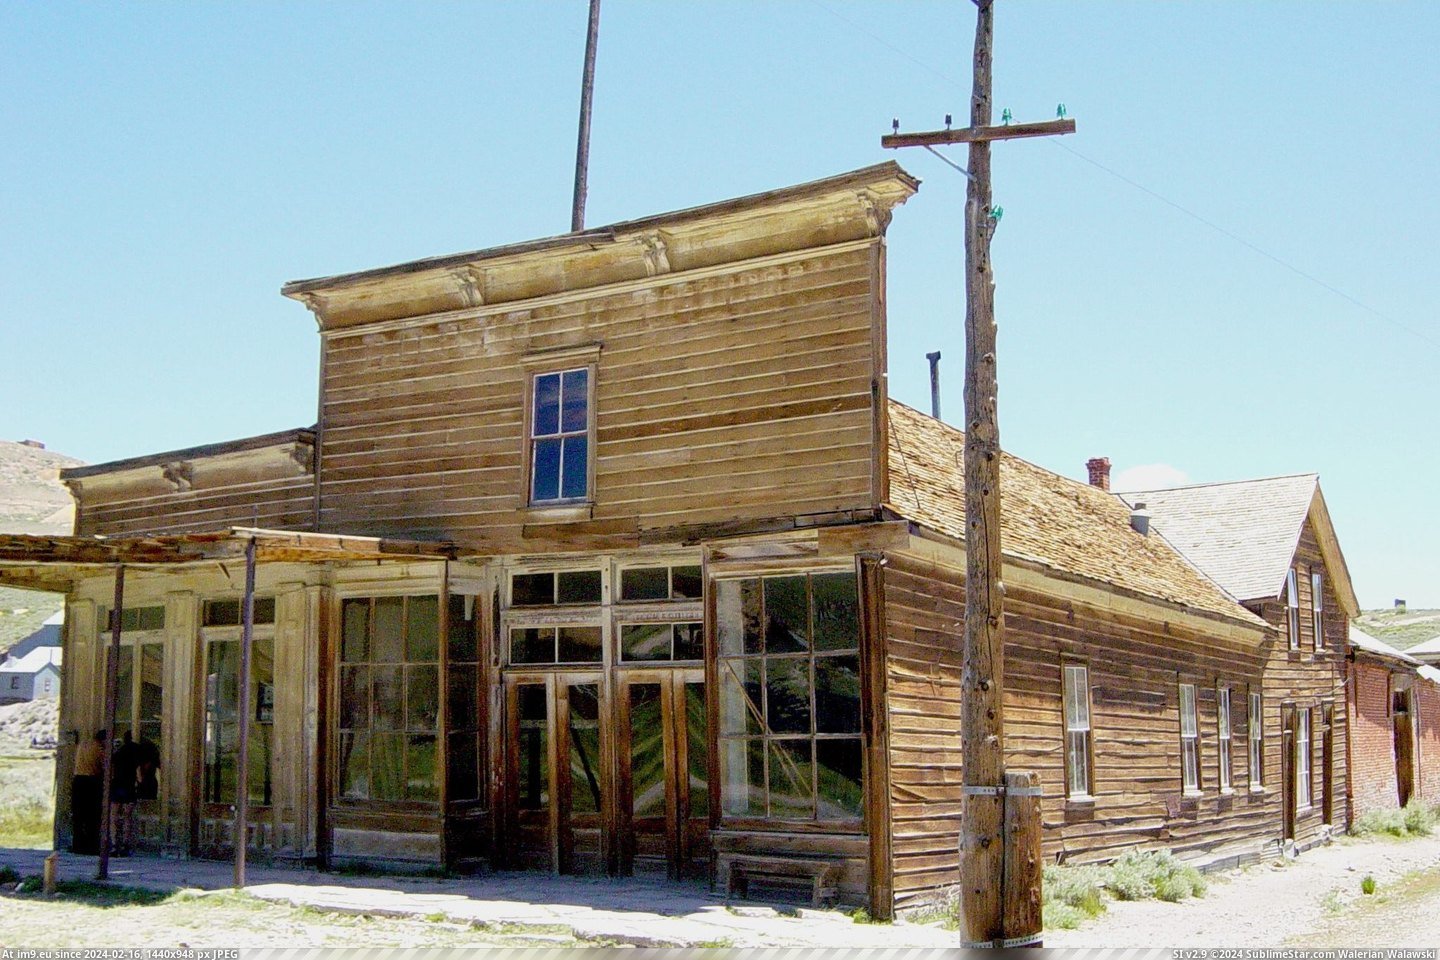 #California #Hotel #Hollis #Wheaton #Store #Bodie Wheaton And Hollis Hotel And Bodie Store In Bodie, California Pic. (Image of album Bodie - a ghost town in Eastern California))